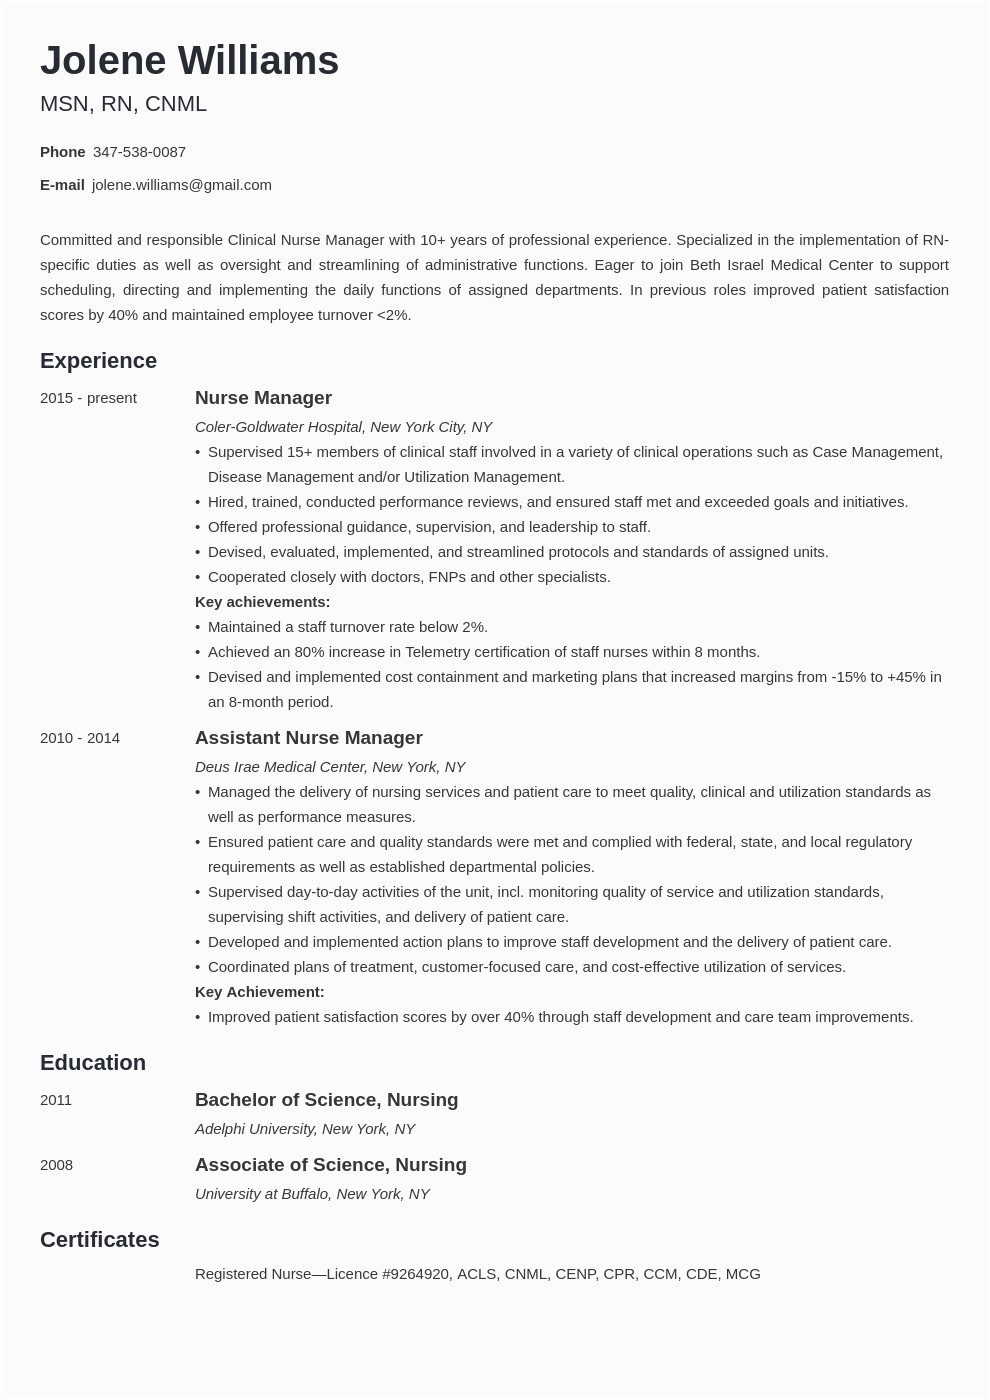 Sample Resume for Nurse Manager Position Nurse Manager Resume Example Template Minimo In 2020